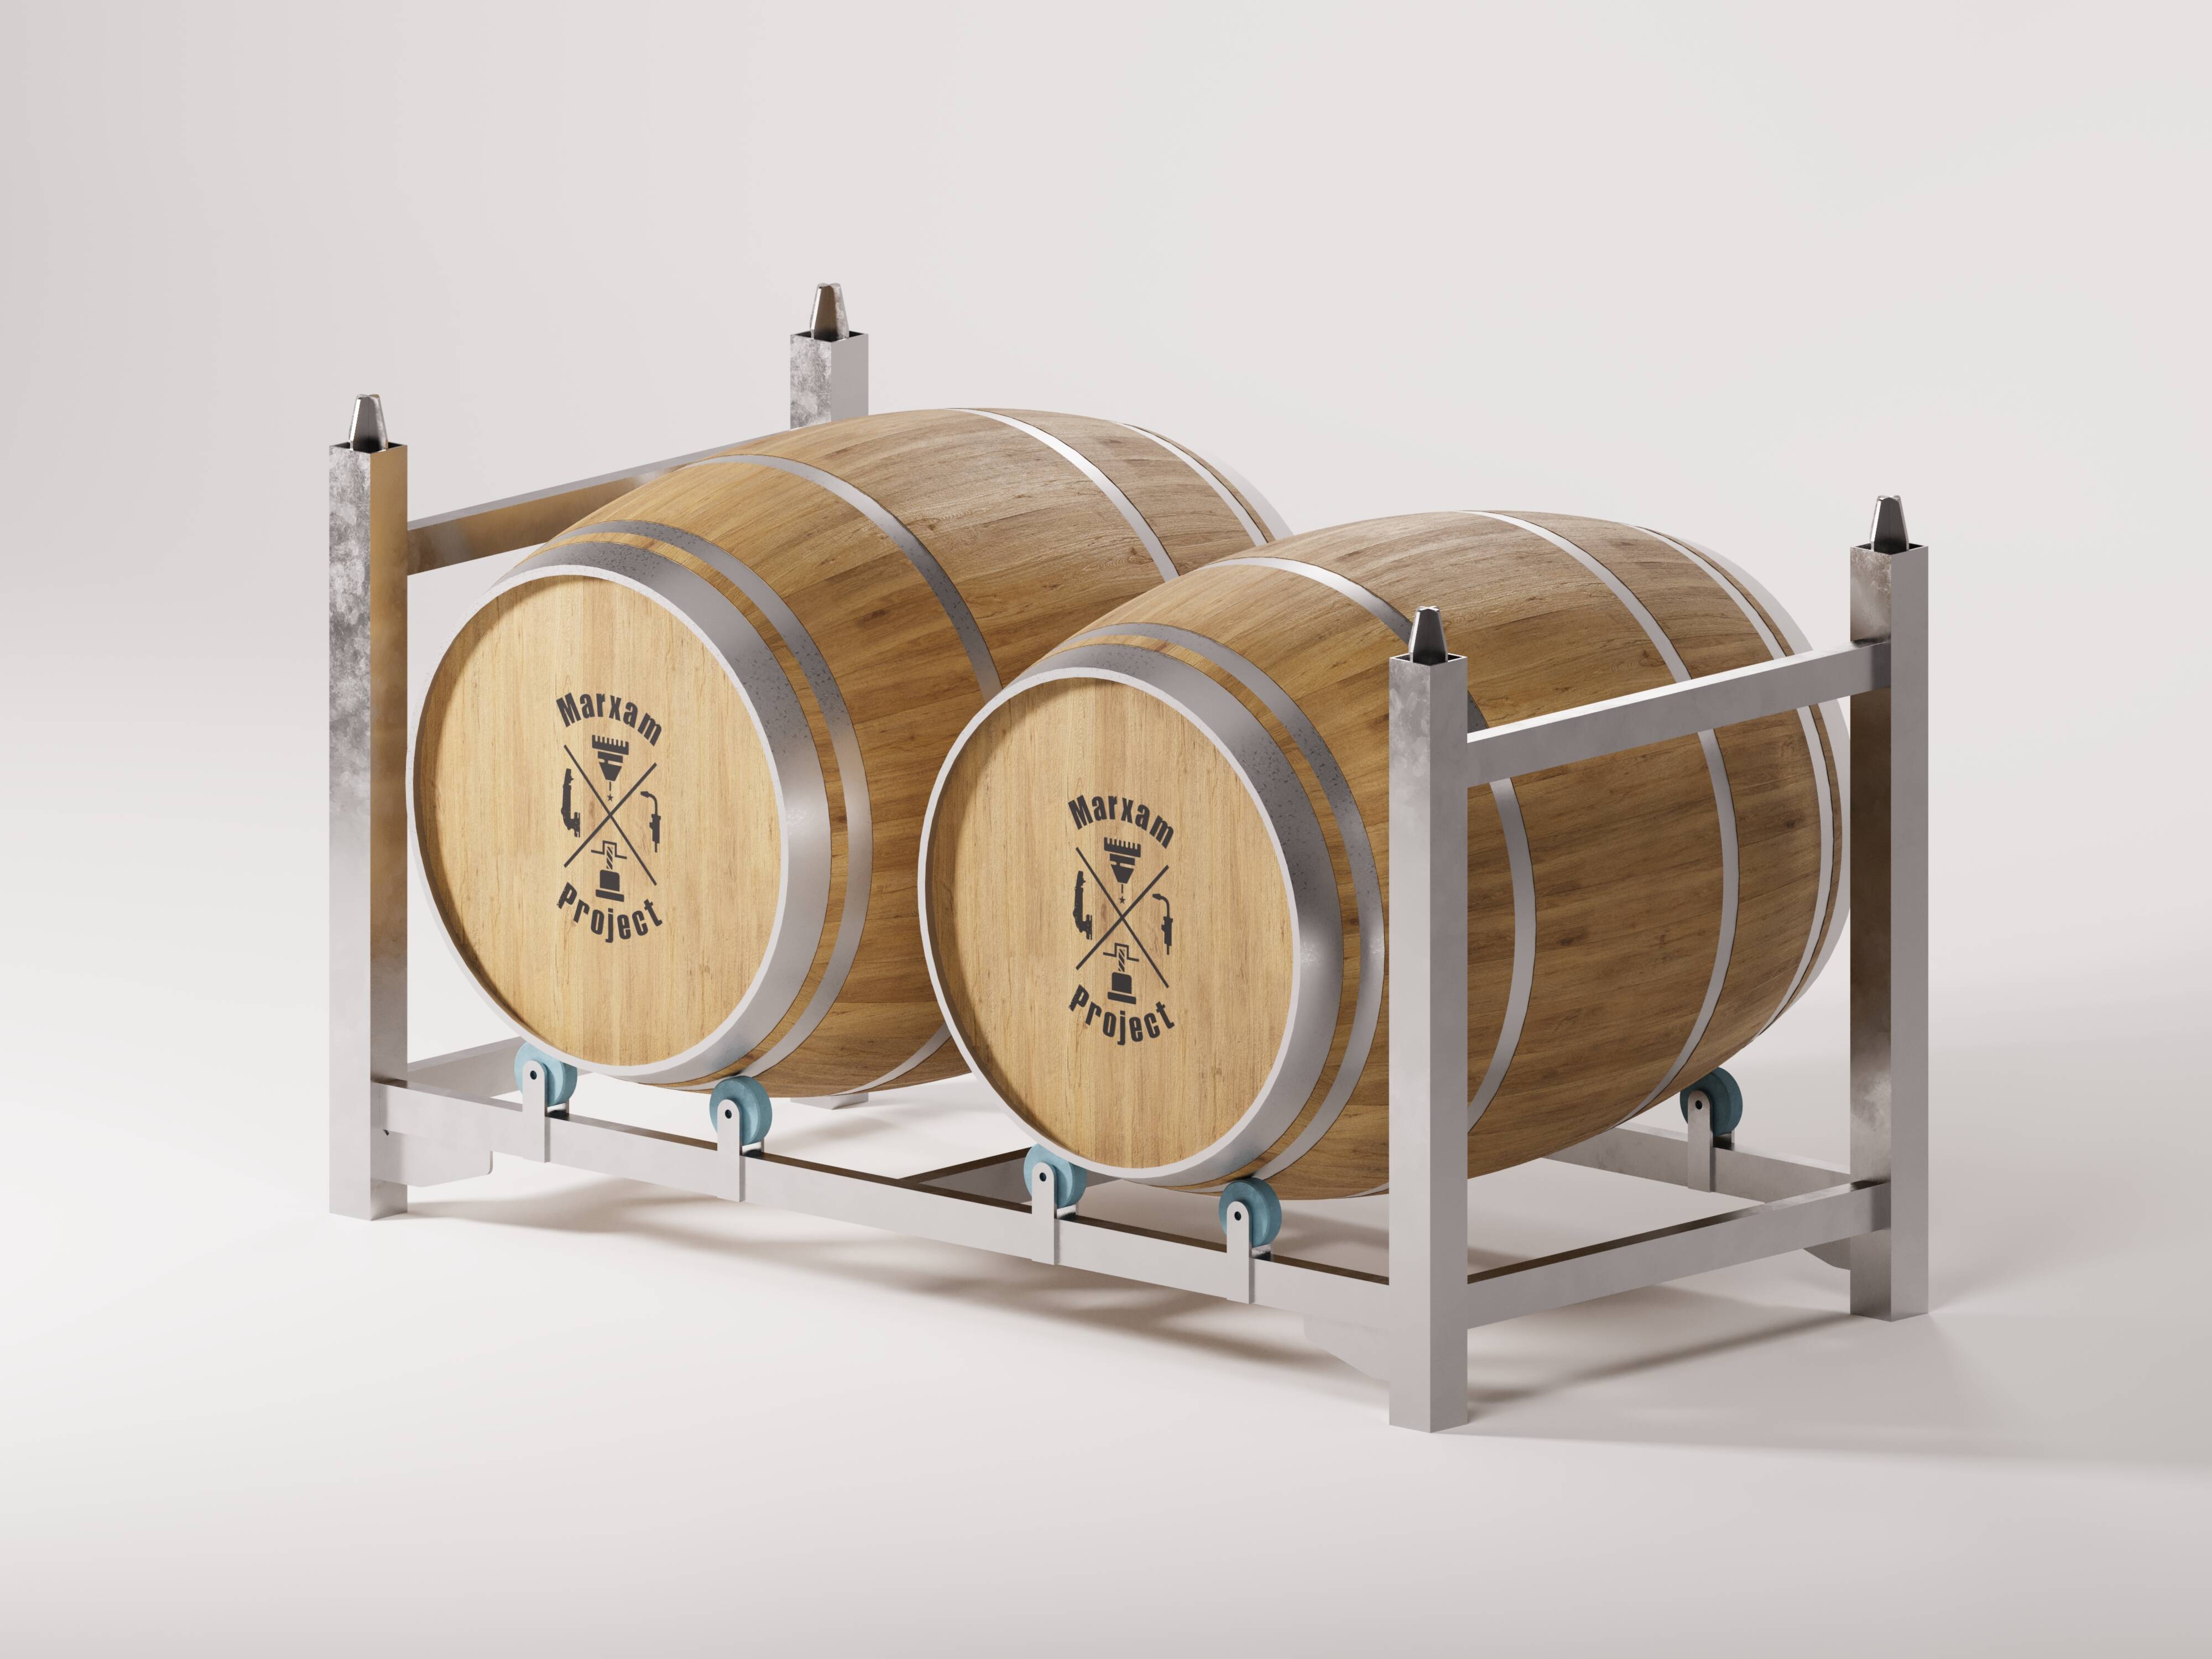 The image depicts a sturdy rotating cage barrel holder holding two well-maintained wooden barrels.